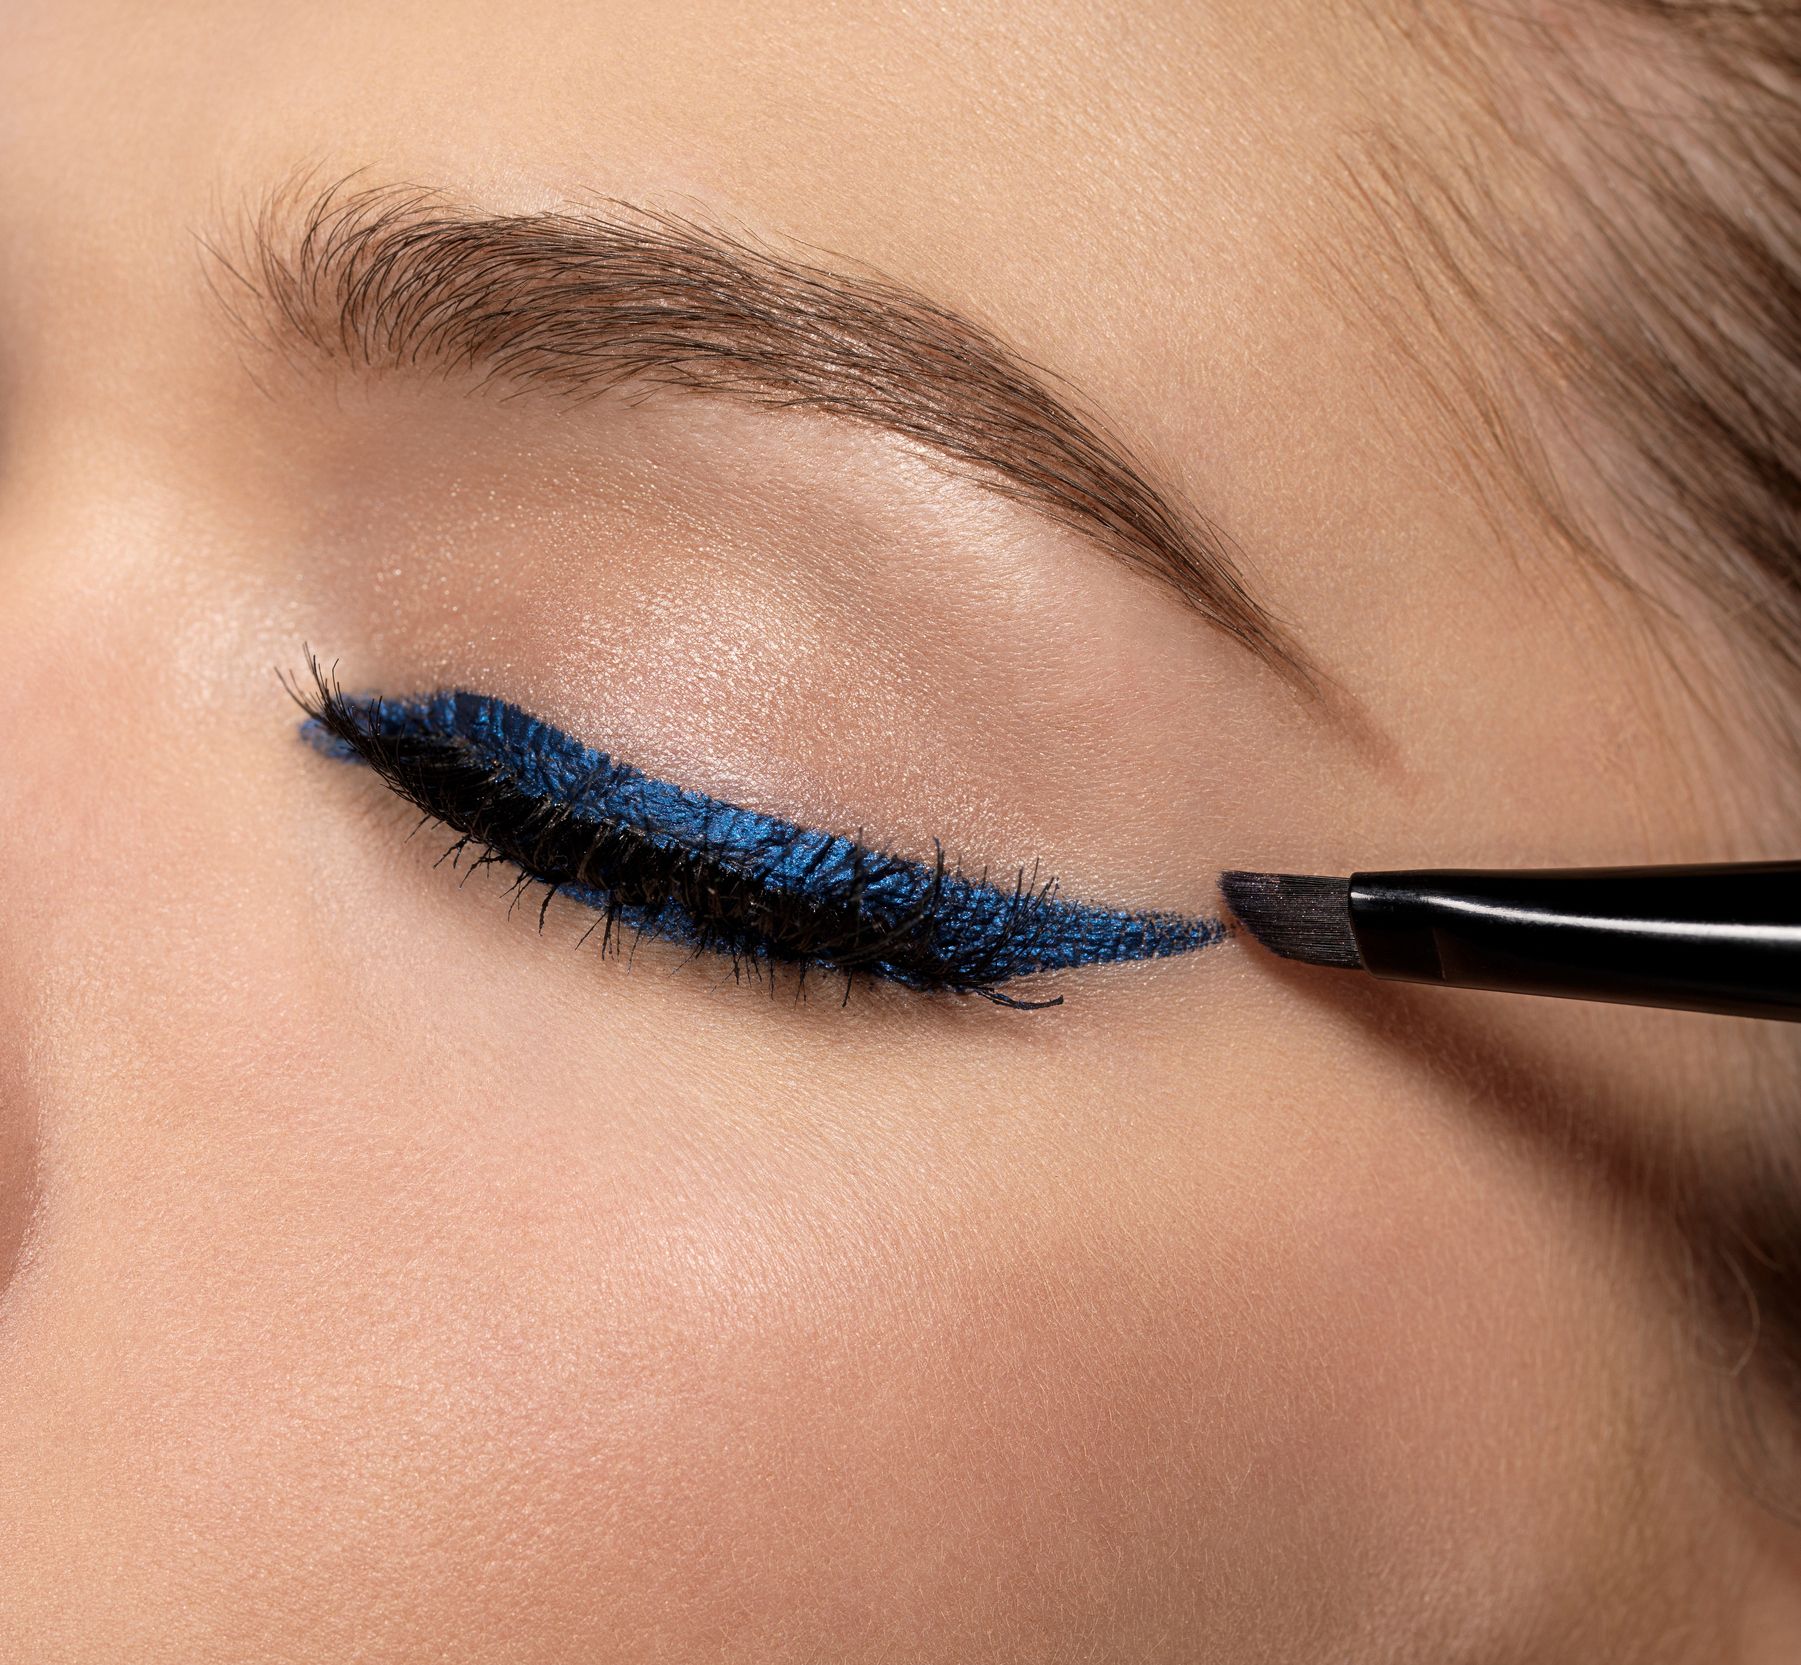 How to Eyeliner a Pro - Step By Step Videos Tips for Applying Eyeliner